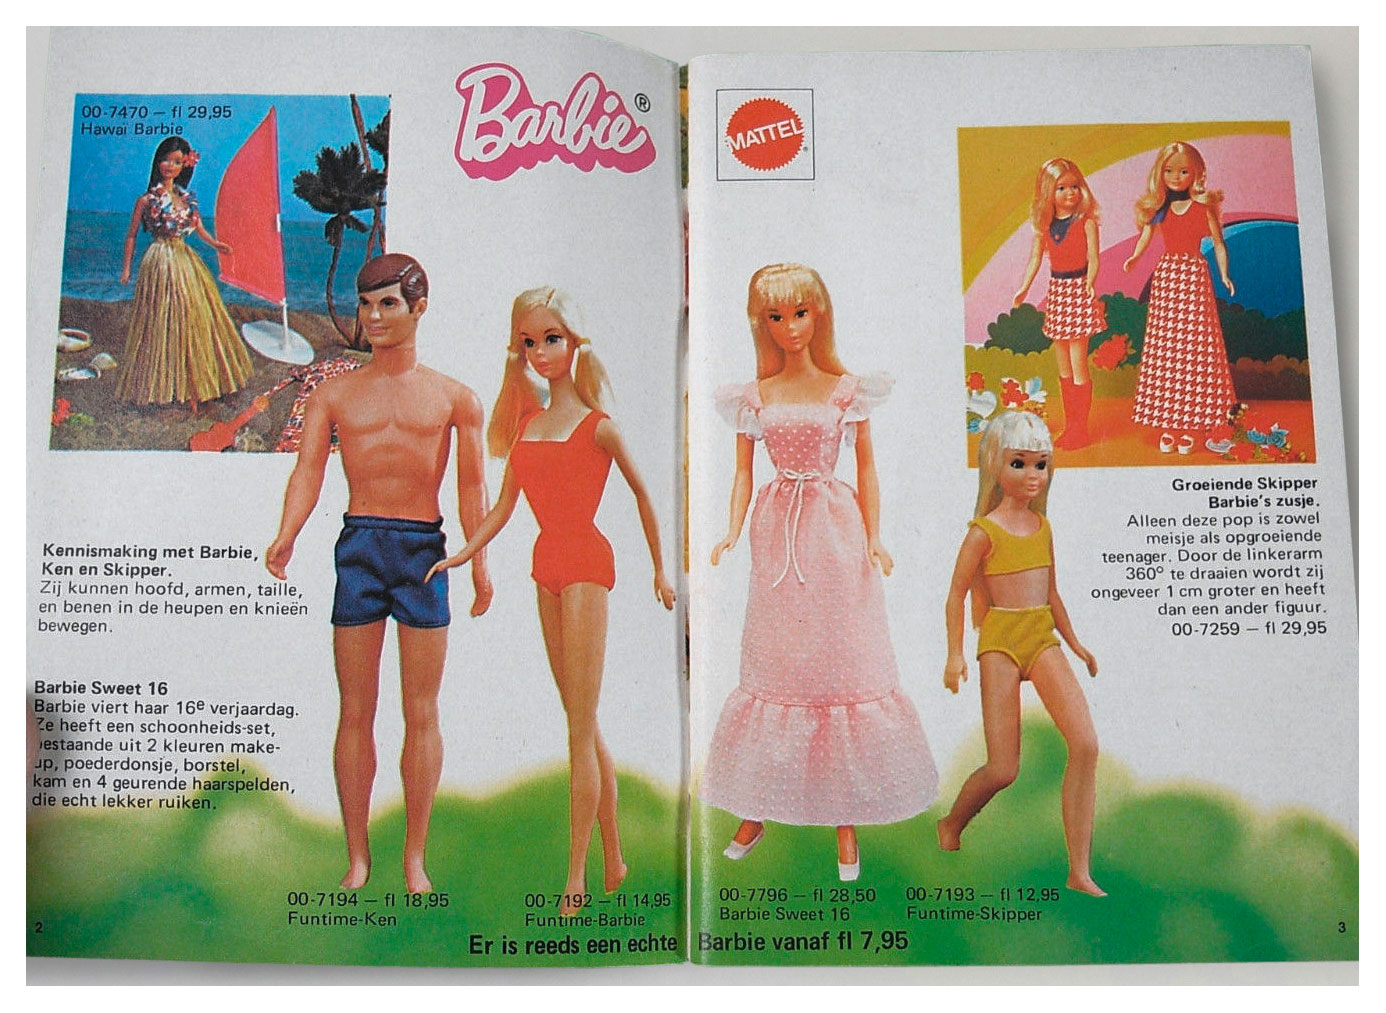 From 1975 Dutch Barbie booklet